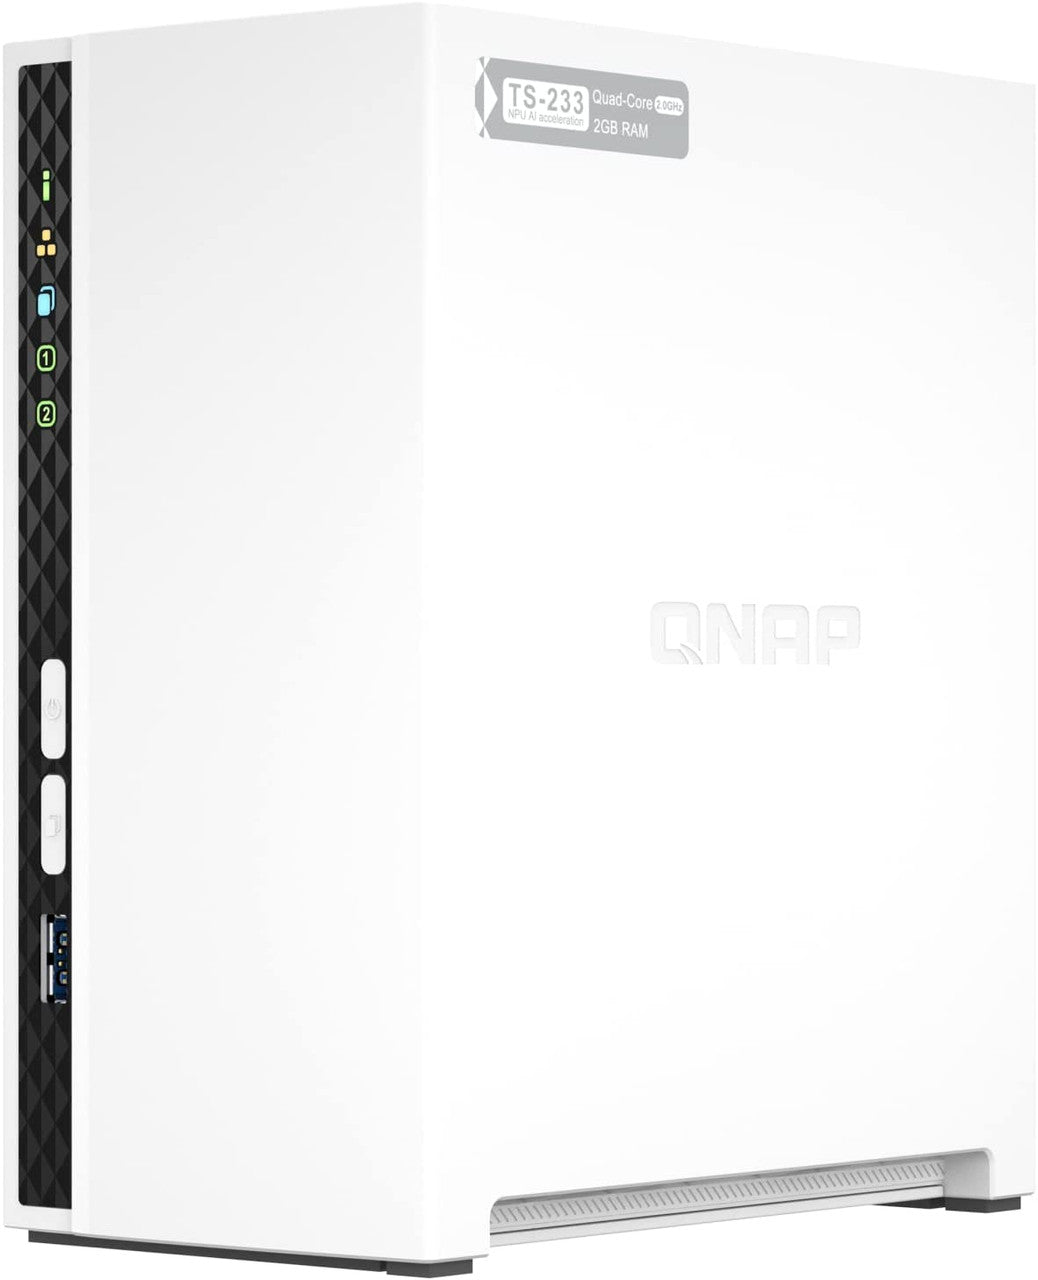 QNAP TS-233 2-Bay Desktop NAS with a 4TB (2 x 2TB) of Western Digital Red Plus Drives Fully Assembled and Tested